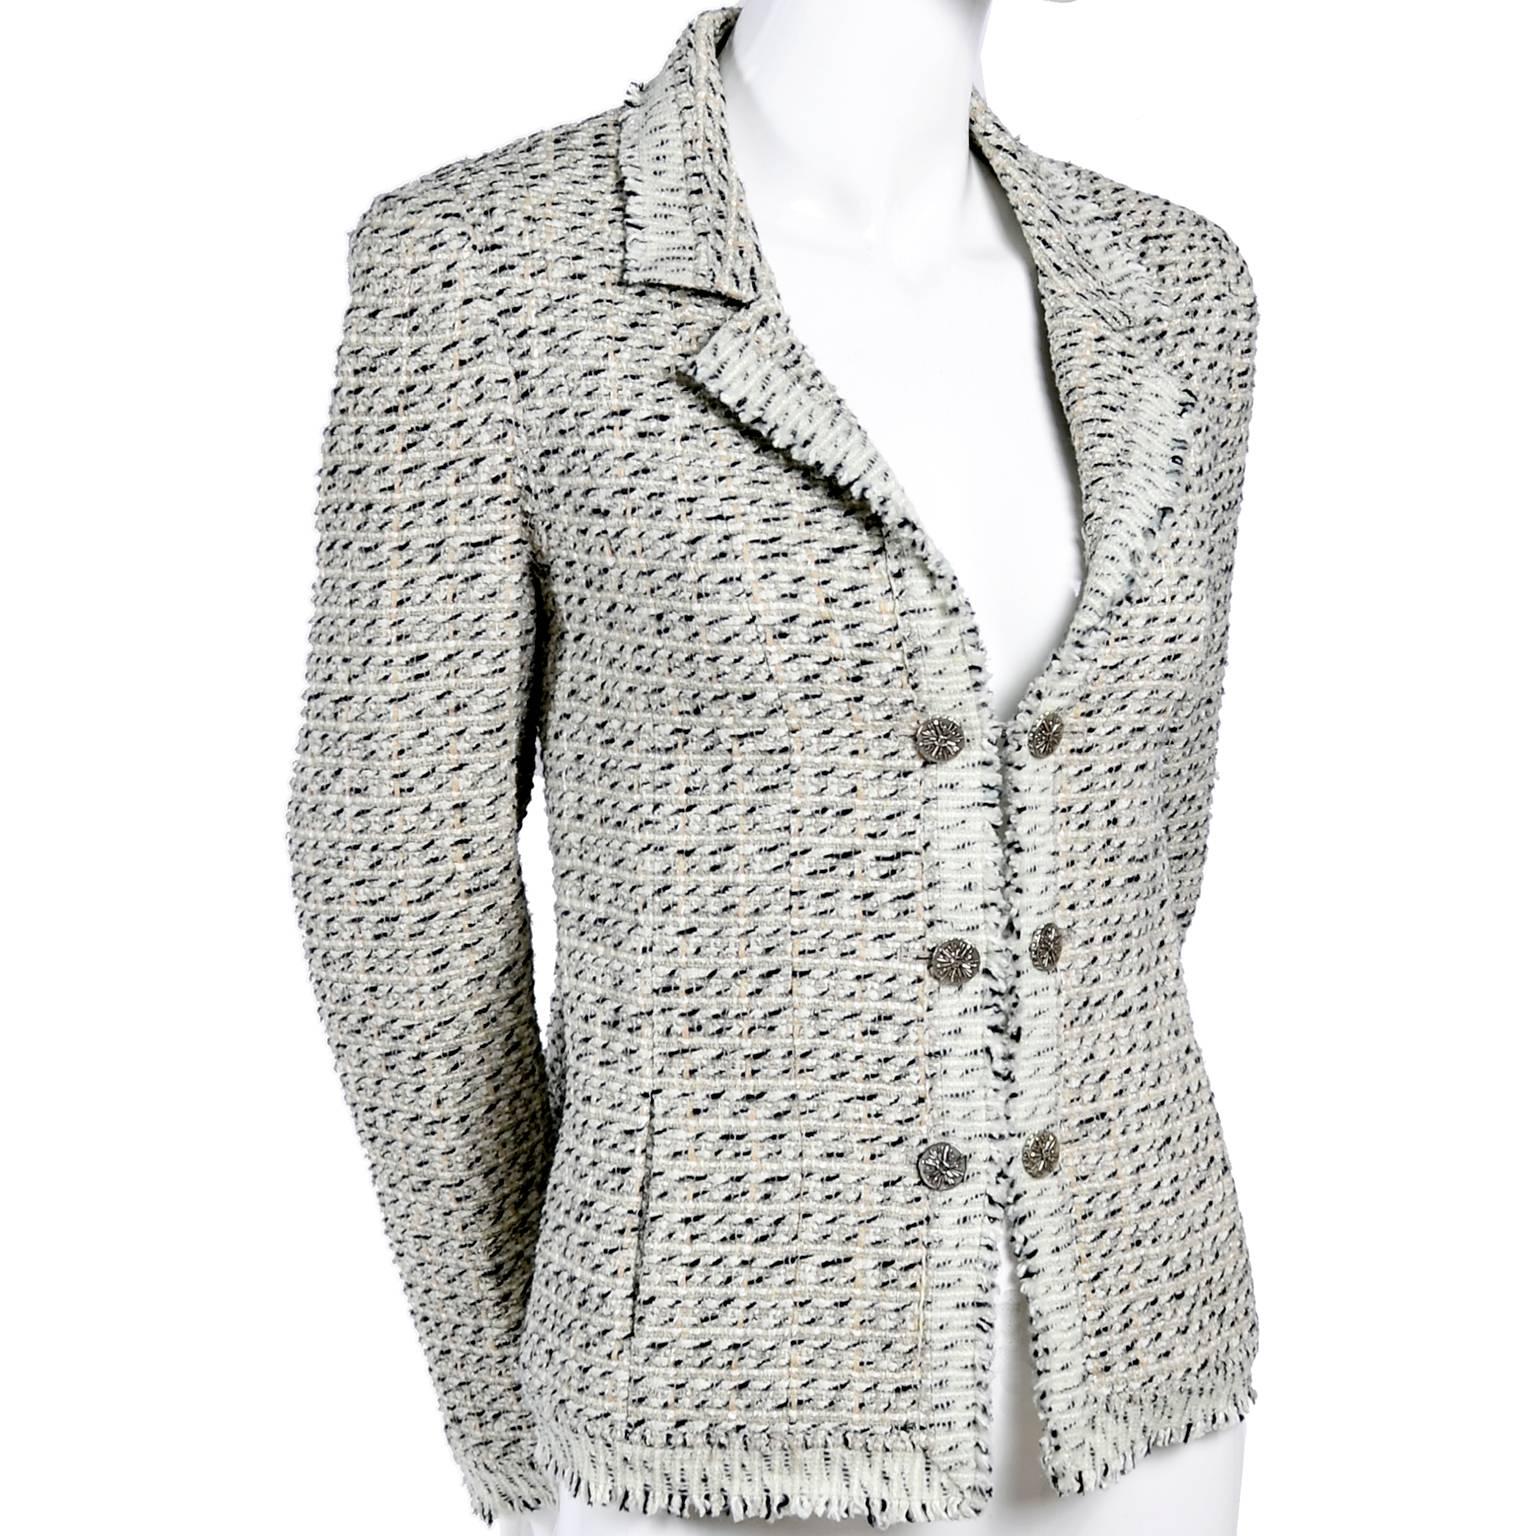 This Chanel jacket is from 2004 and is in a black, ivory and cream Lessage fantasy tweed made of 49% cotton 25% wool 11% nylon 10% Rayon and 5% linen. This short blazer has logo pale ecru silk lining, slit pockets, double chain front cc logo buttons